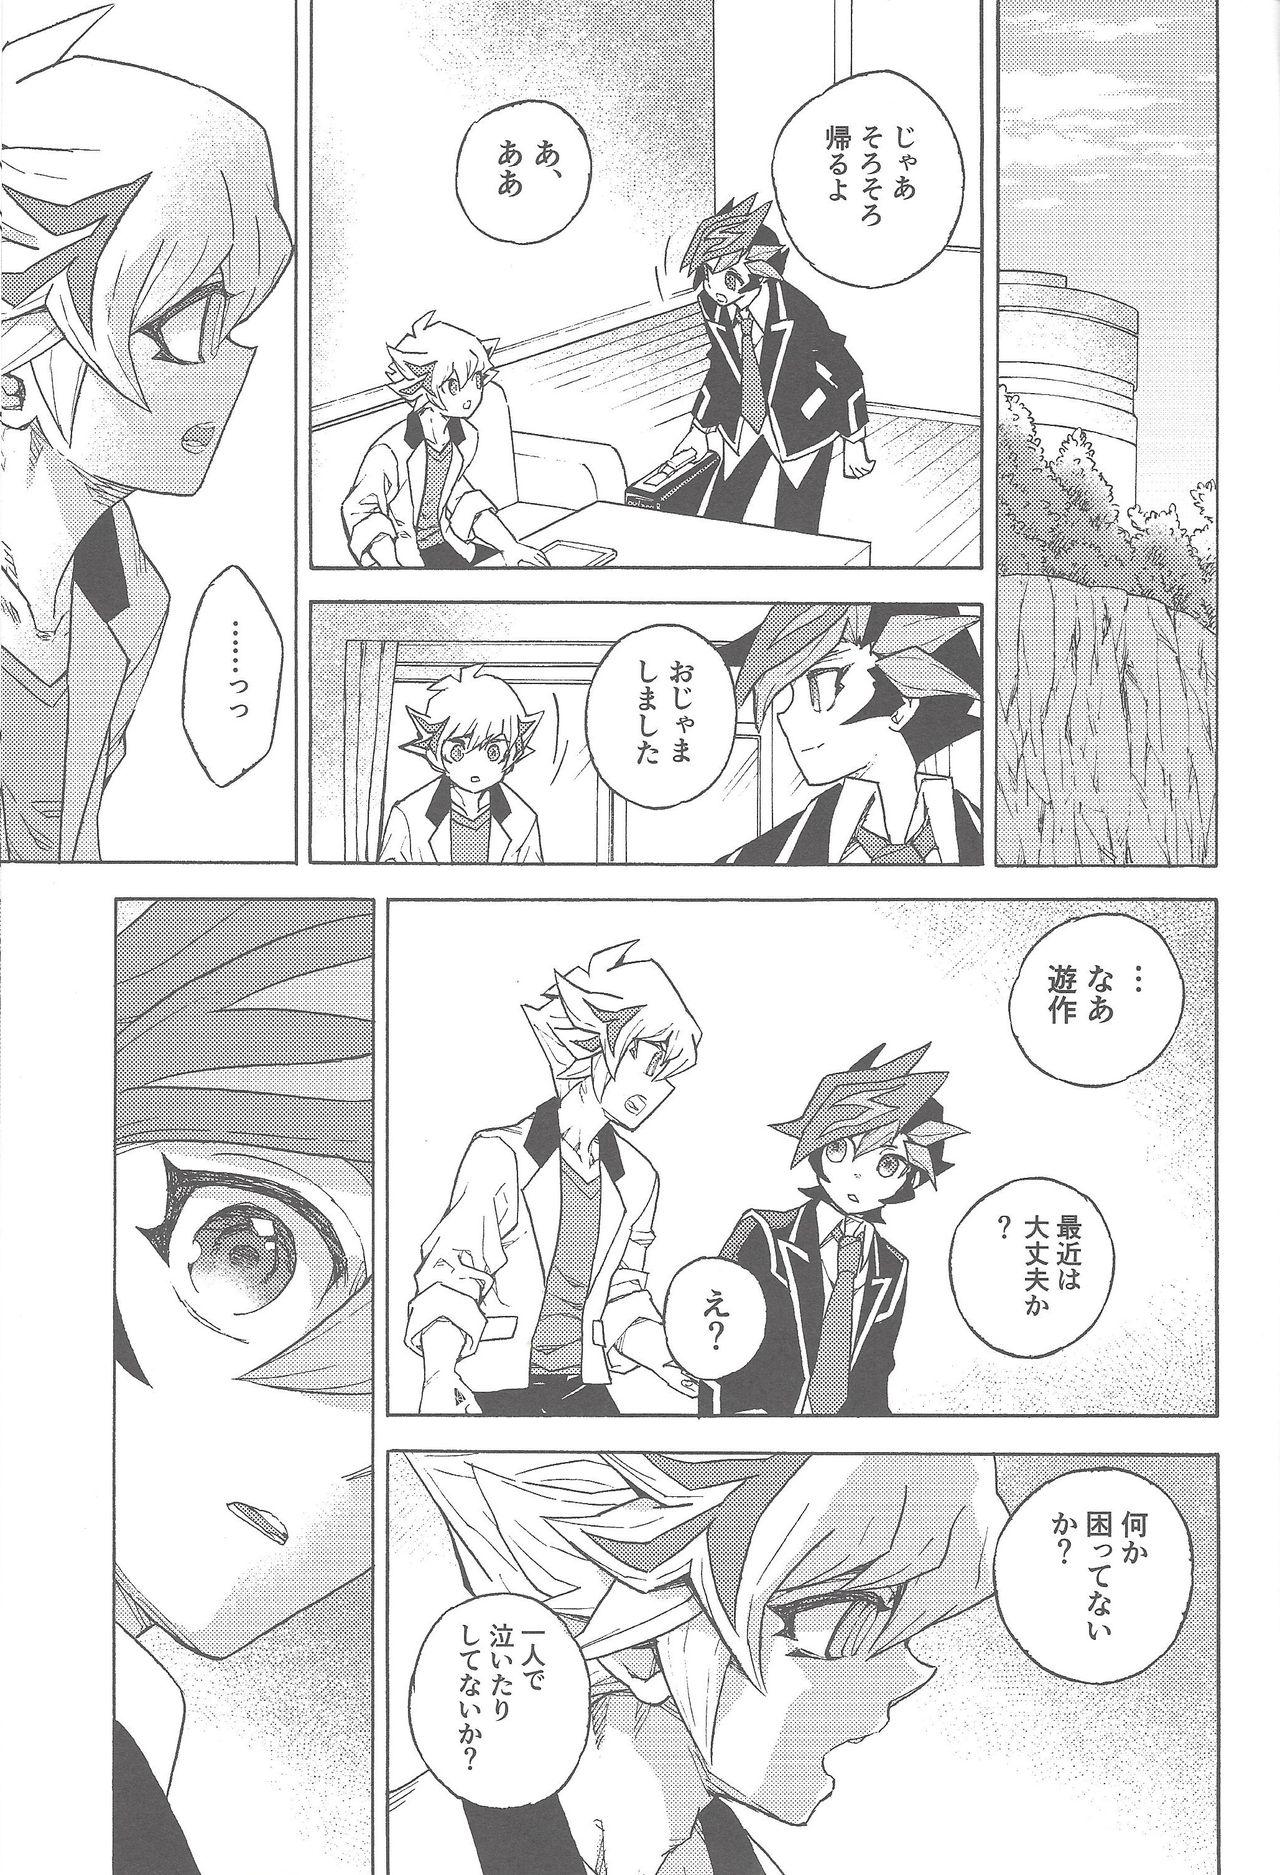 Alone twoway traffic - Yu gi oh vrains Ass To Mouth - Page 2